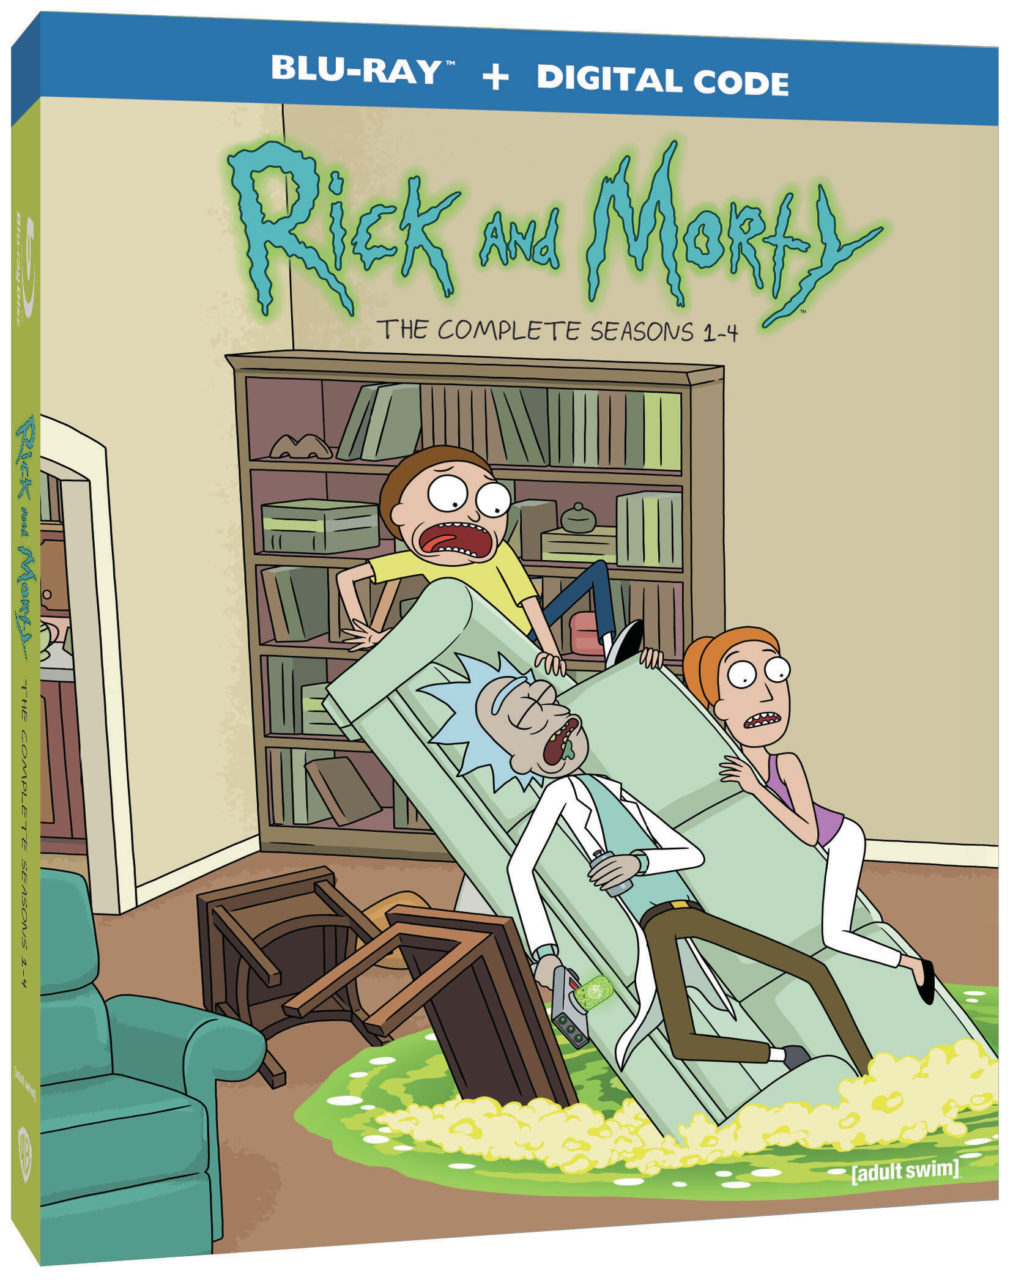 Rick And Morty: The Complete Seasons 1-4 Blu-Ray Combo Pack cover (Warner Bros. Home Entertainment)